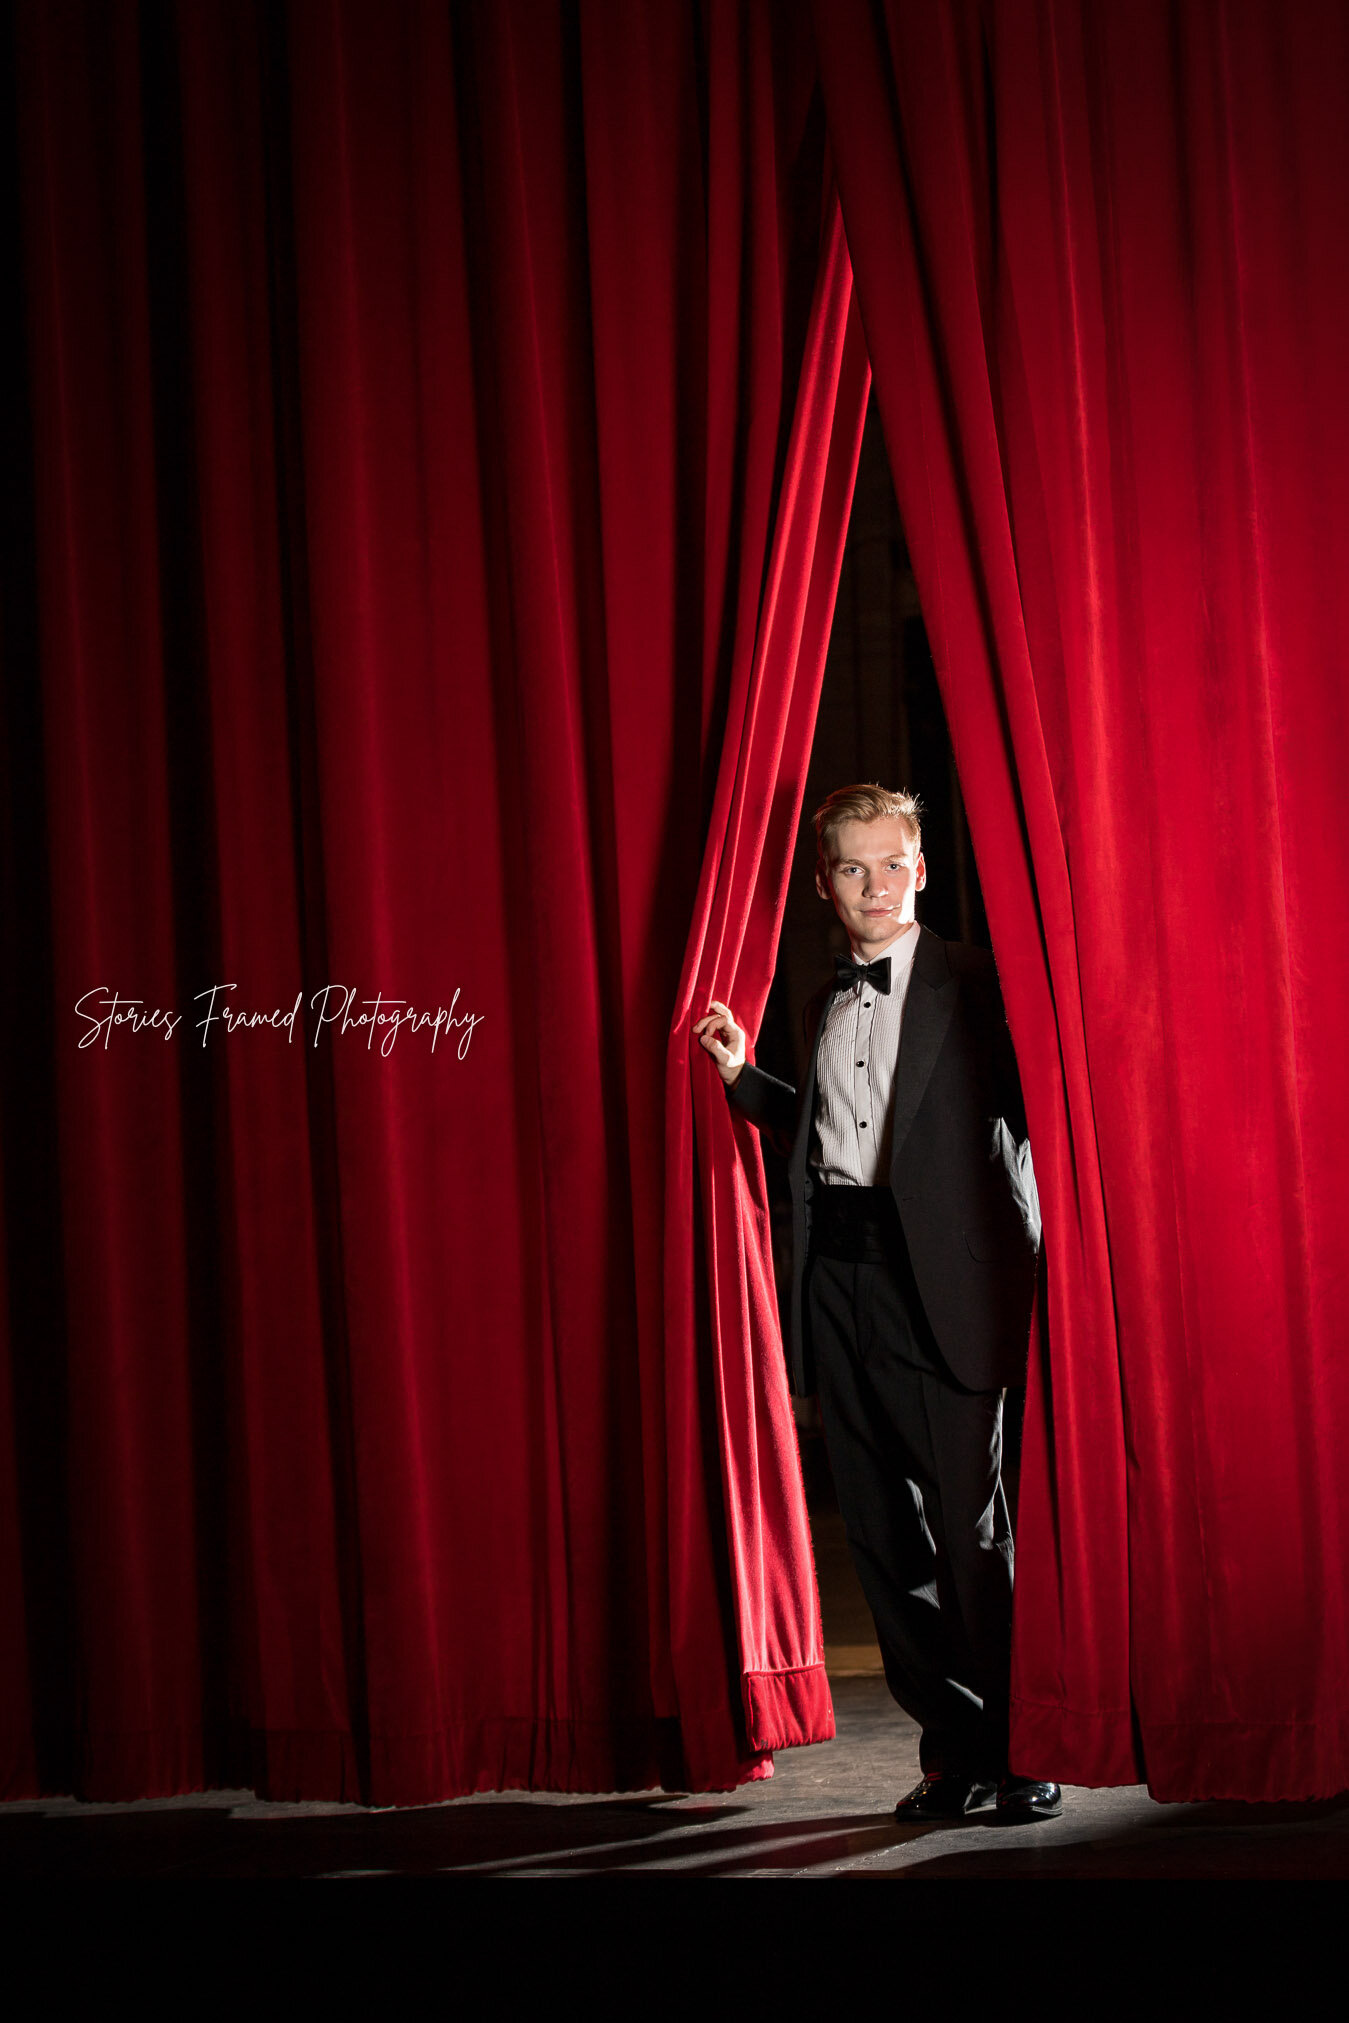 08-31-days-of-joy-red-stage-curtains.jpg